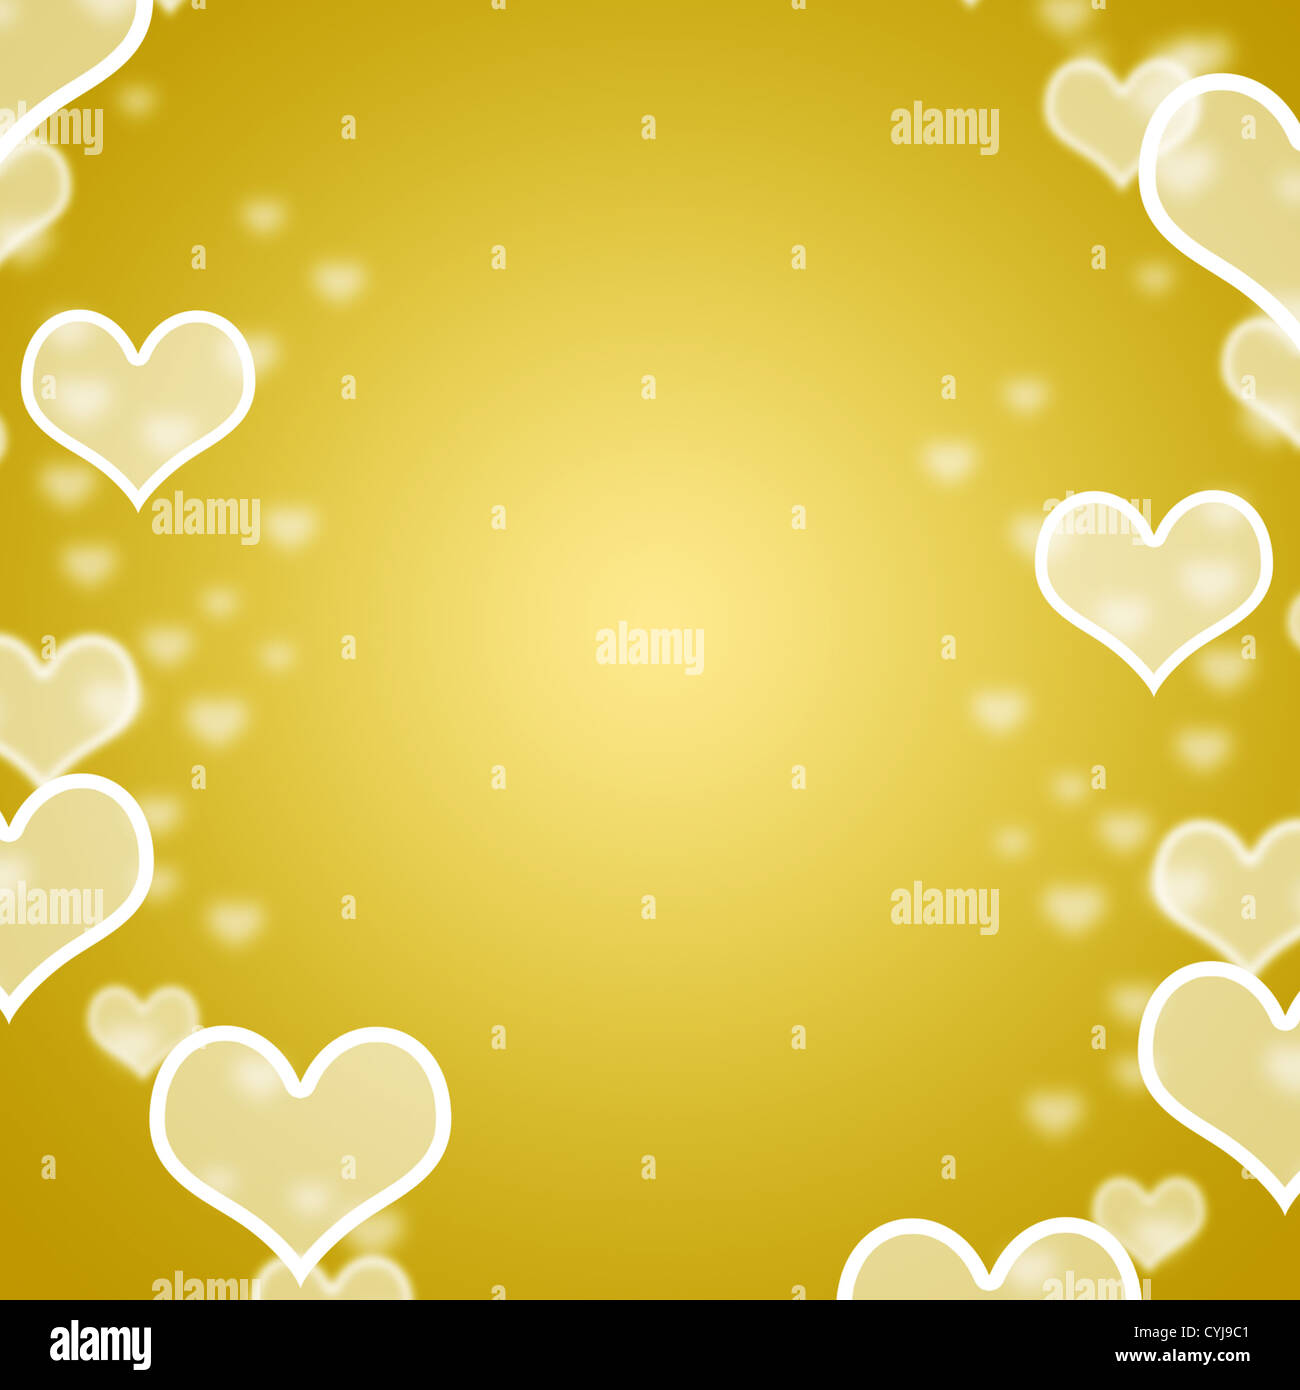 Yellow Hearts Bokeh Background With Blank Copy Space Showing Love Romance And Valentines Stock Photo